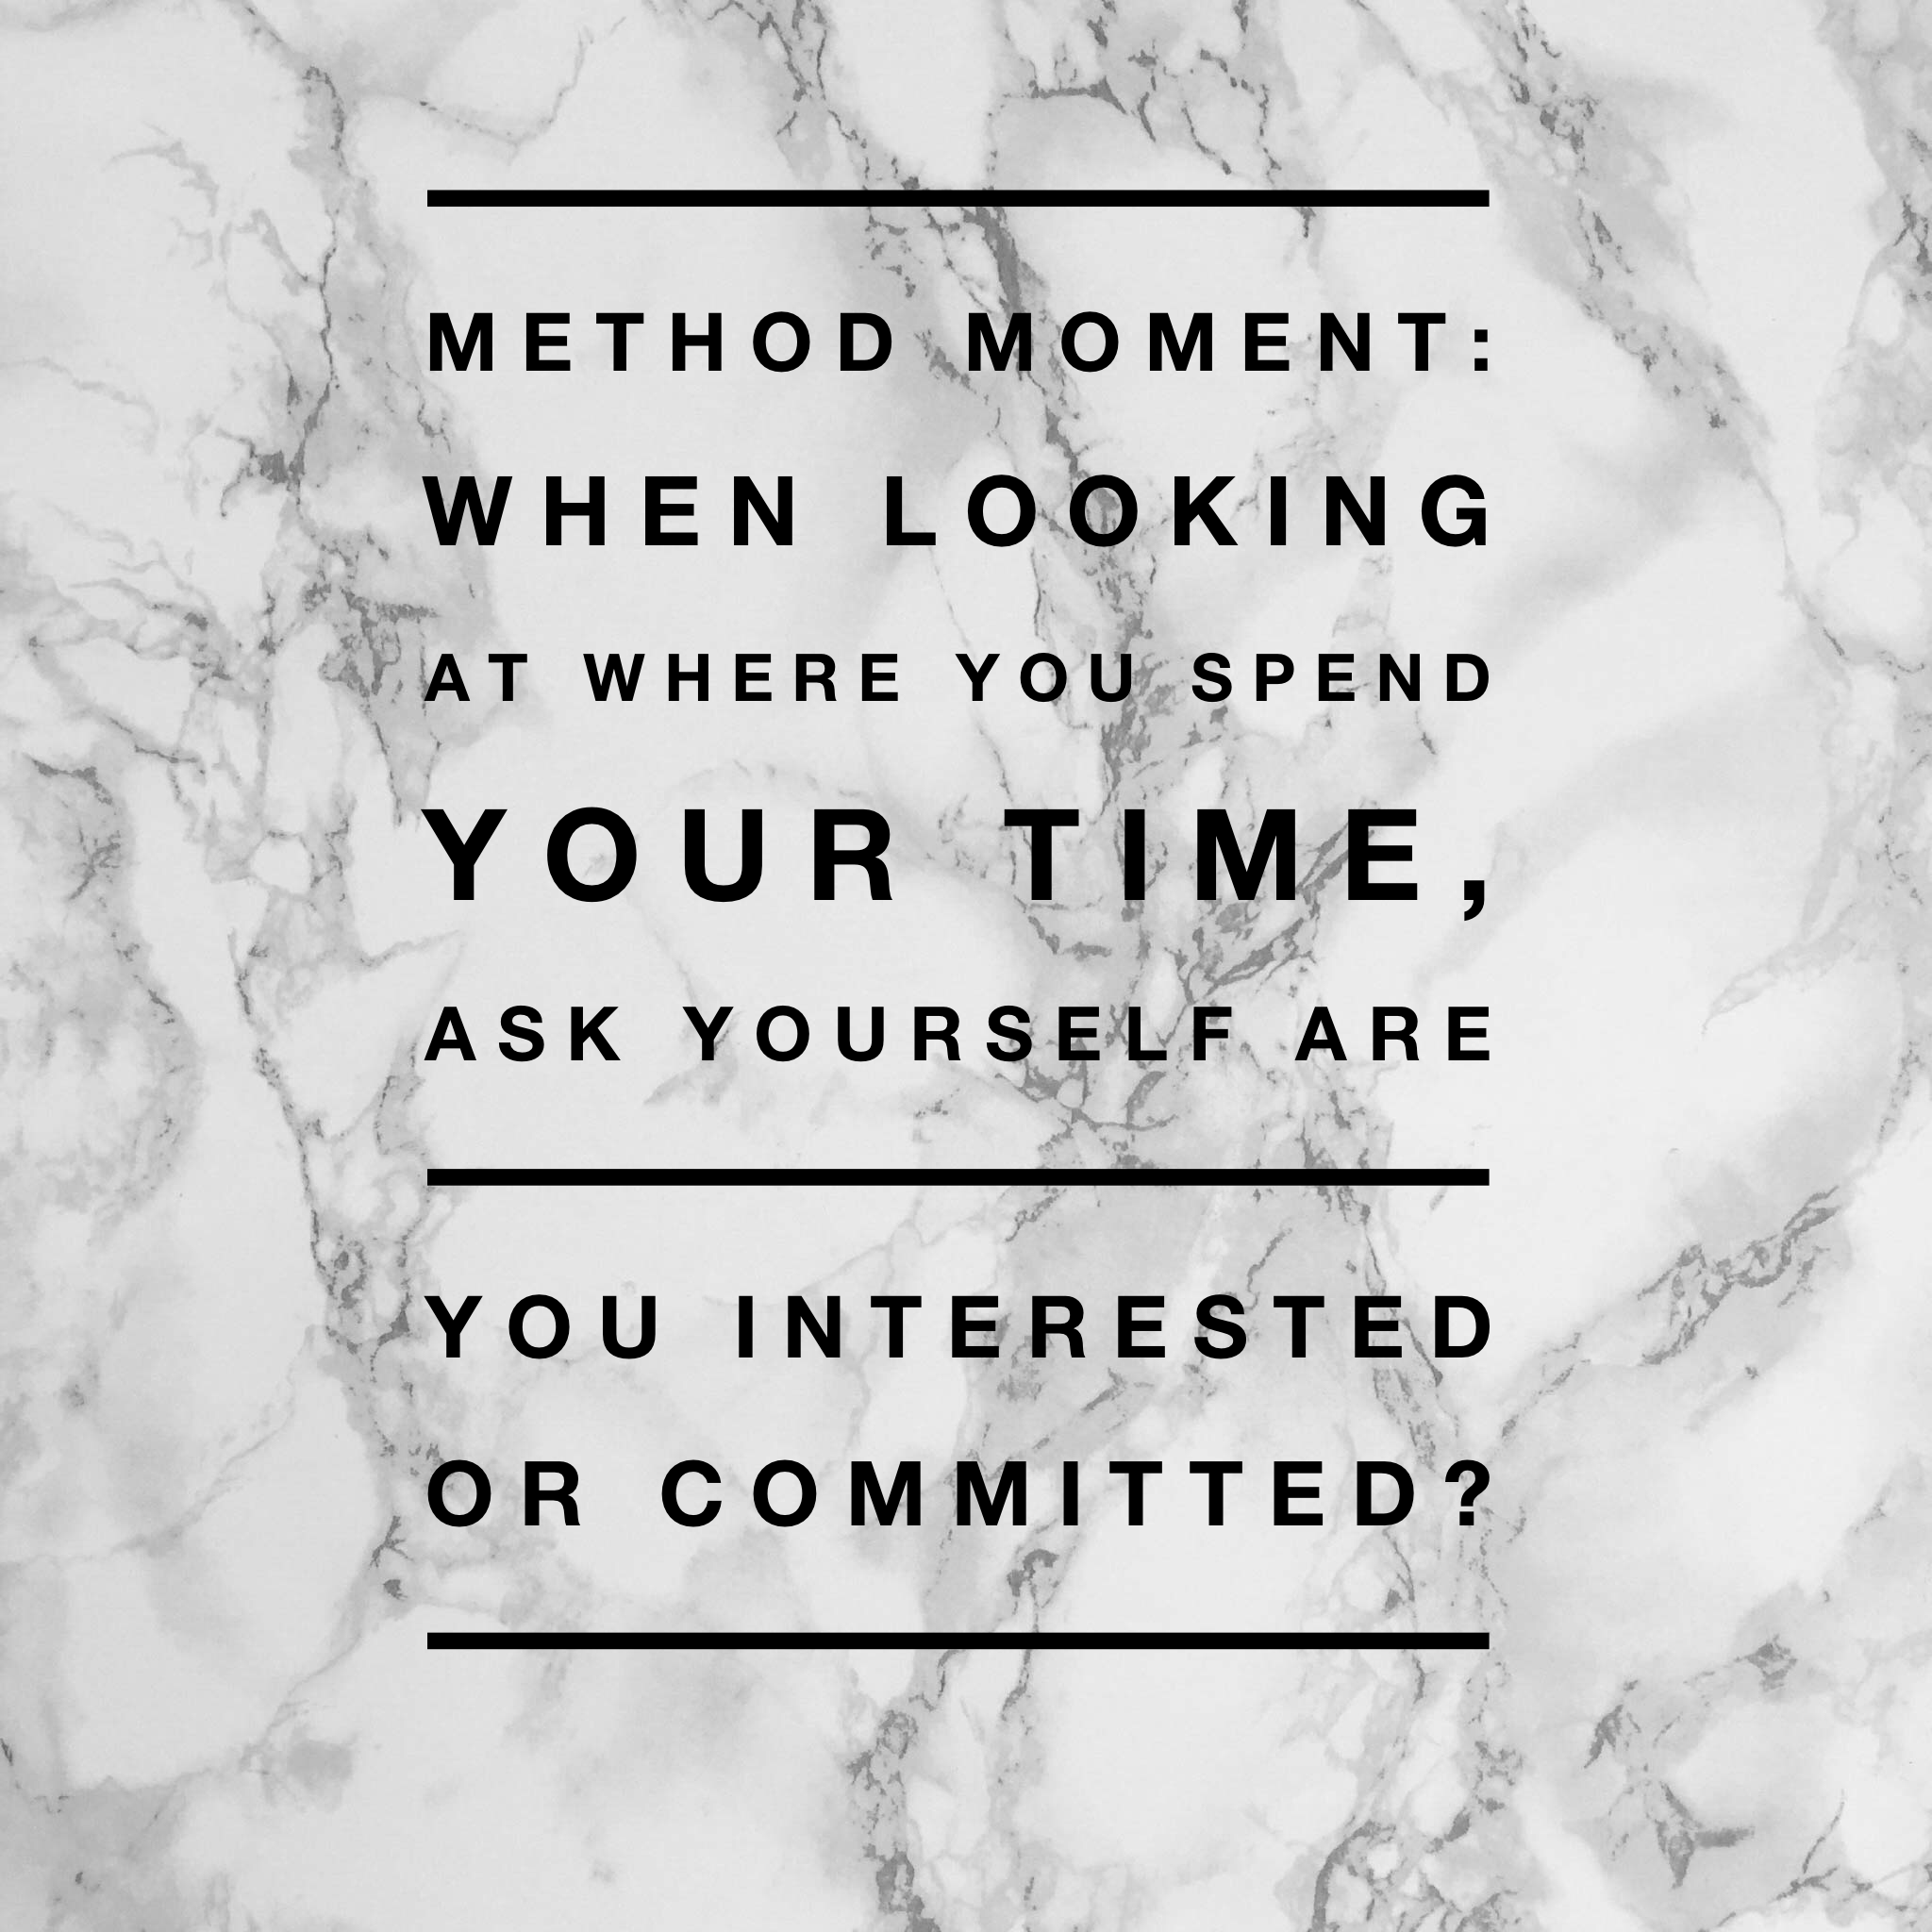 Are you Interested or Committed?